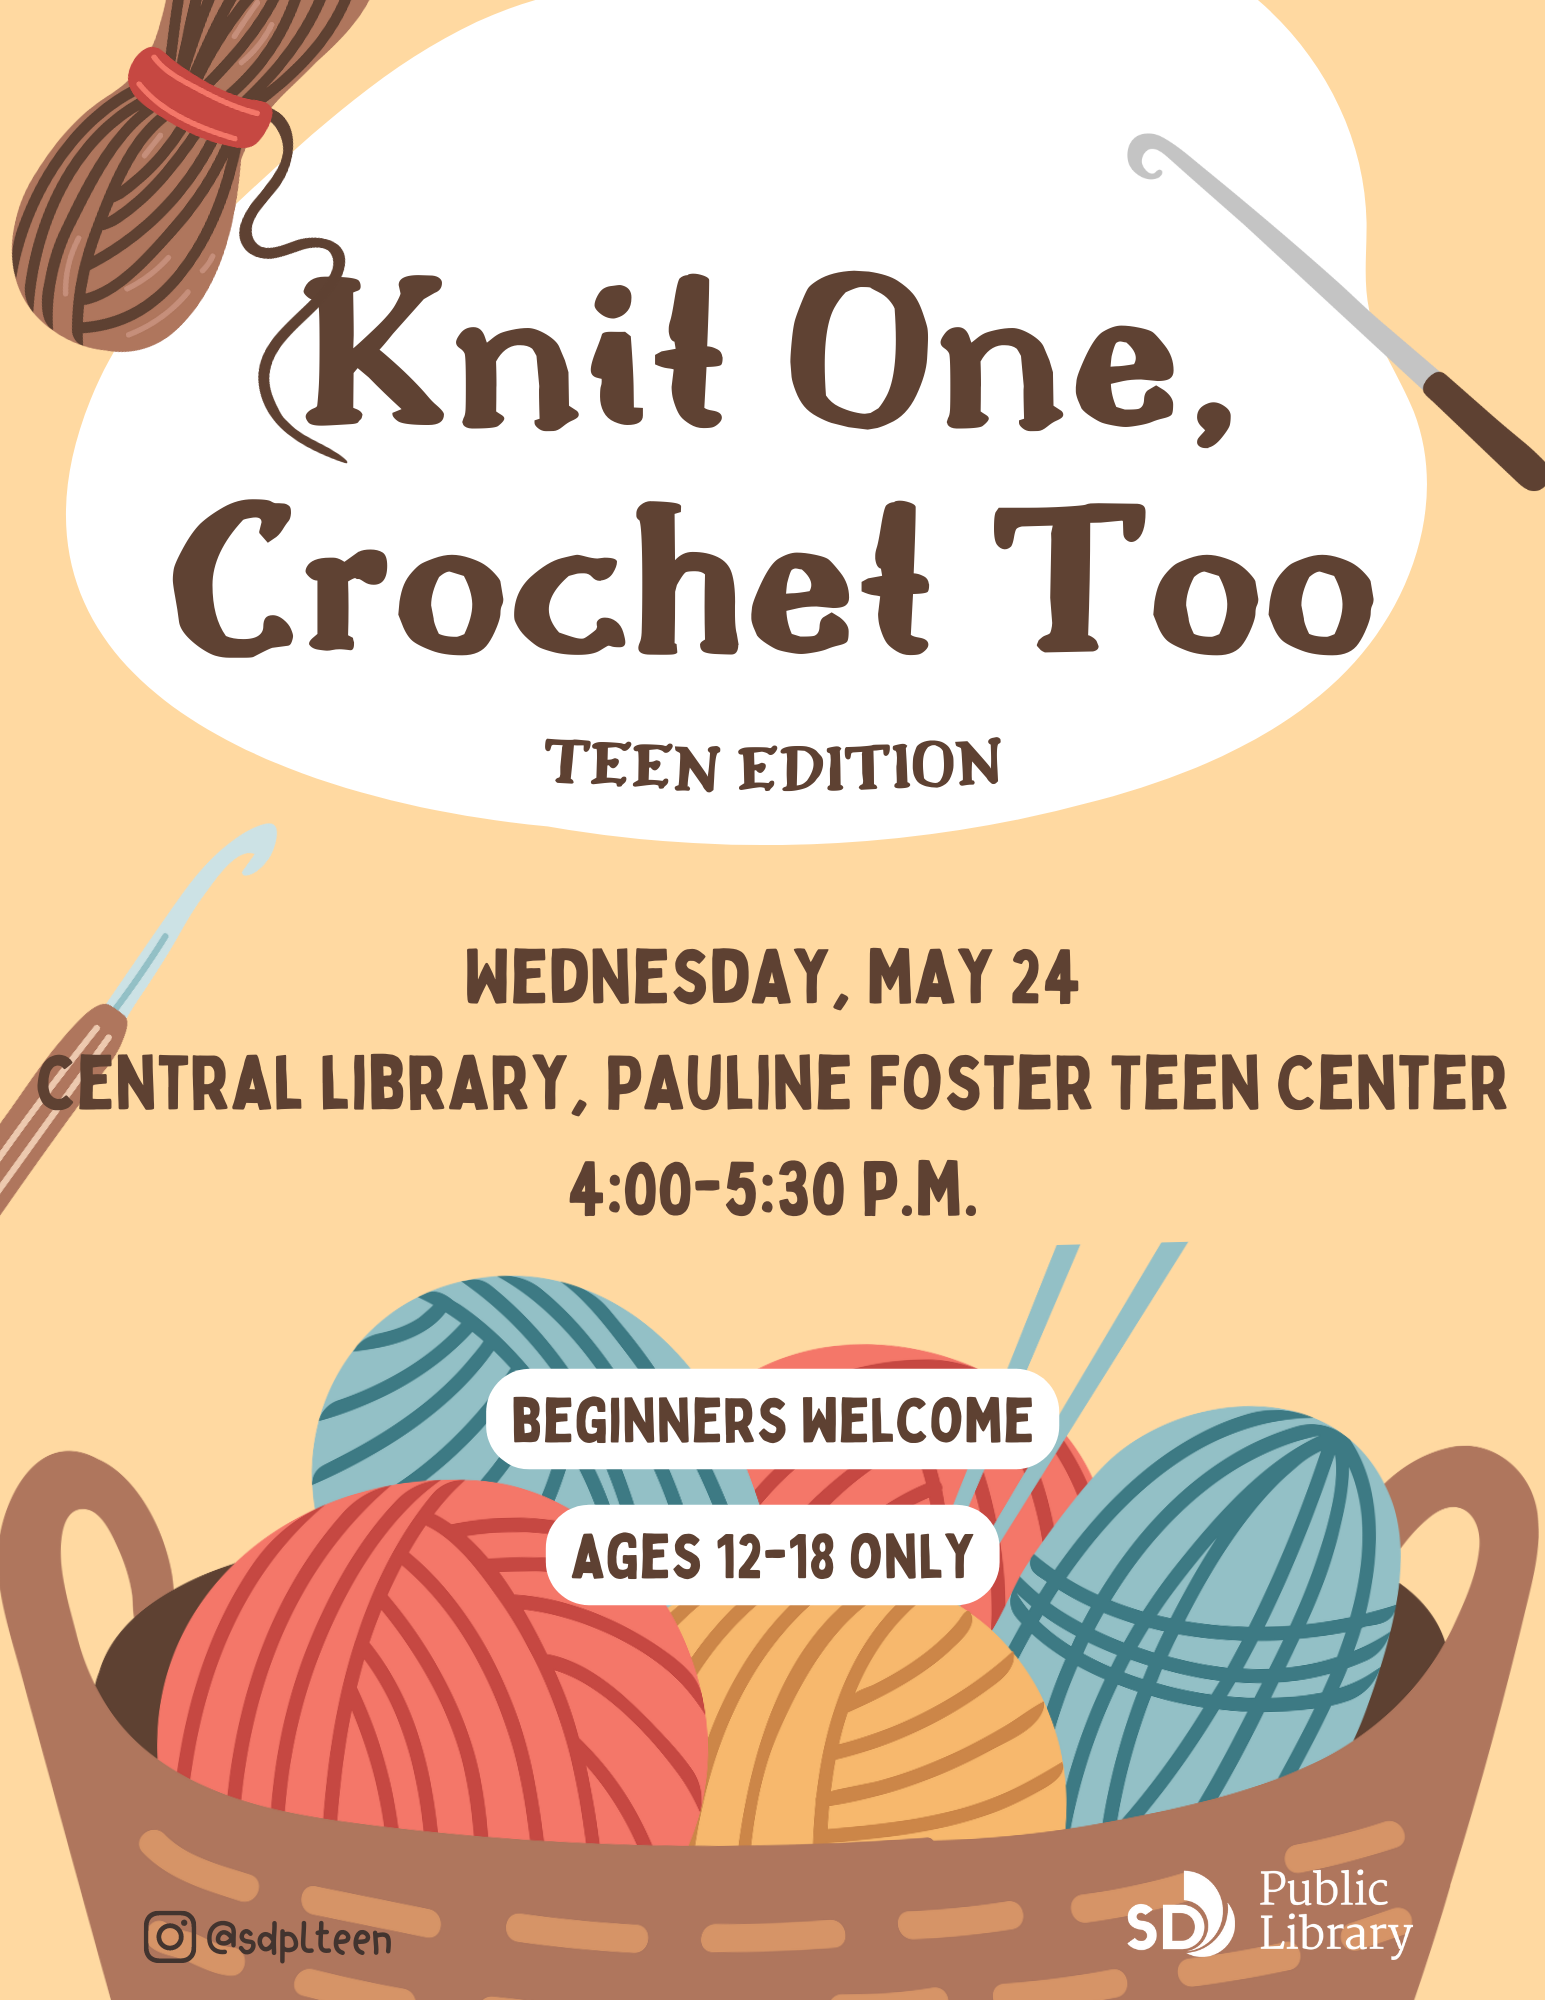 Knit One, Crochet Too (Teen Edition). Wednesday, May 24, Central Library, Pauline Foster Teen Center, 4-5:30pm. Beginners welcome. Ages 12-18 only.